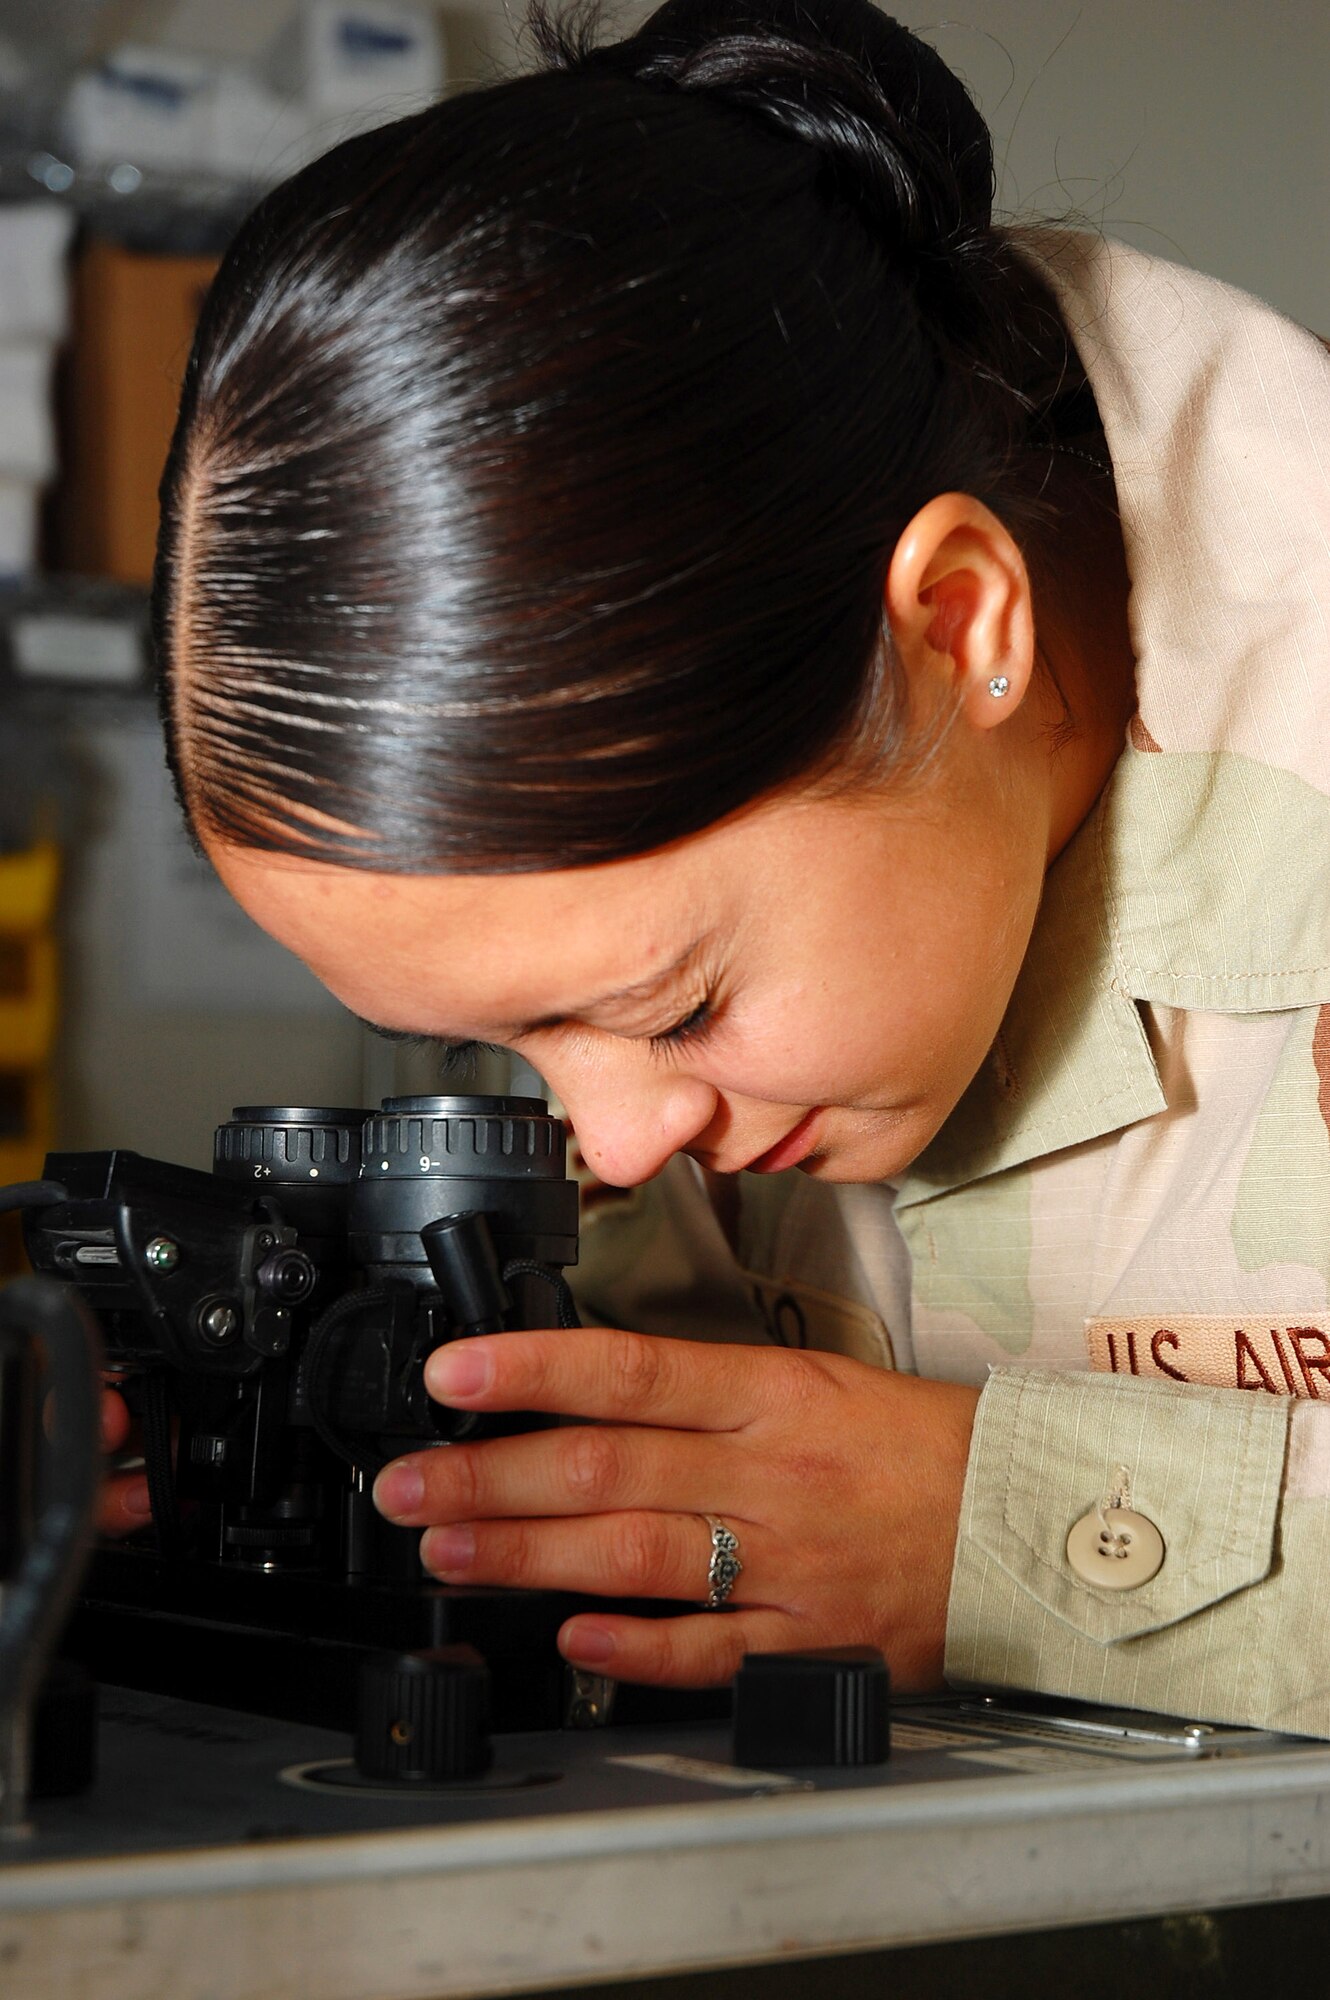 Senior Airman Christina Arao performs a periodic inspection of a set of night-vision goggles Nov. 2 in Southwest Asia. Airman Arao, a 386th Expeditionary Operations Group aircrew life support technician, is deployed from Pope Air Force Base, N.C. (U.S. Air Force photo/Staff Sgt. Tia Schroeder)
